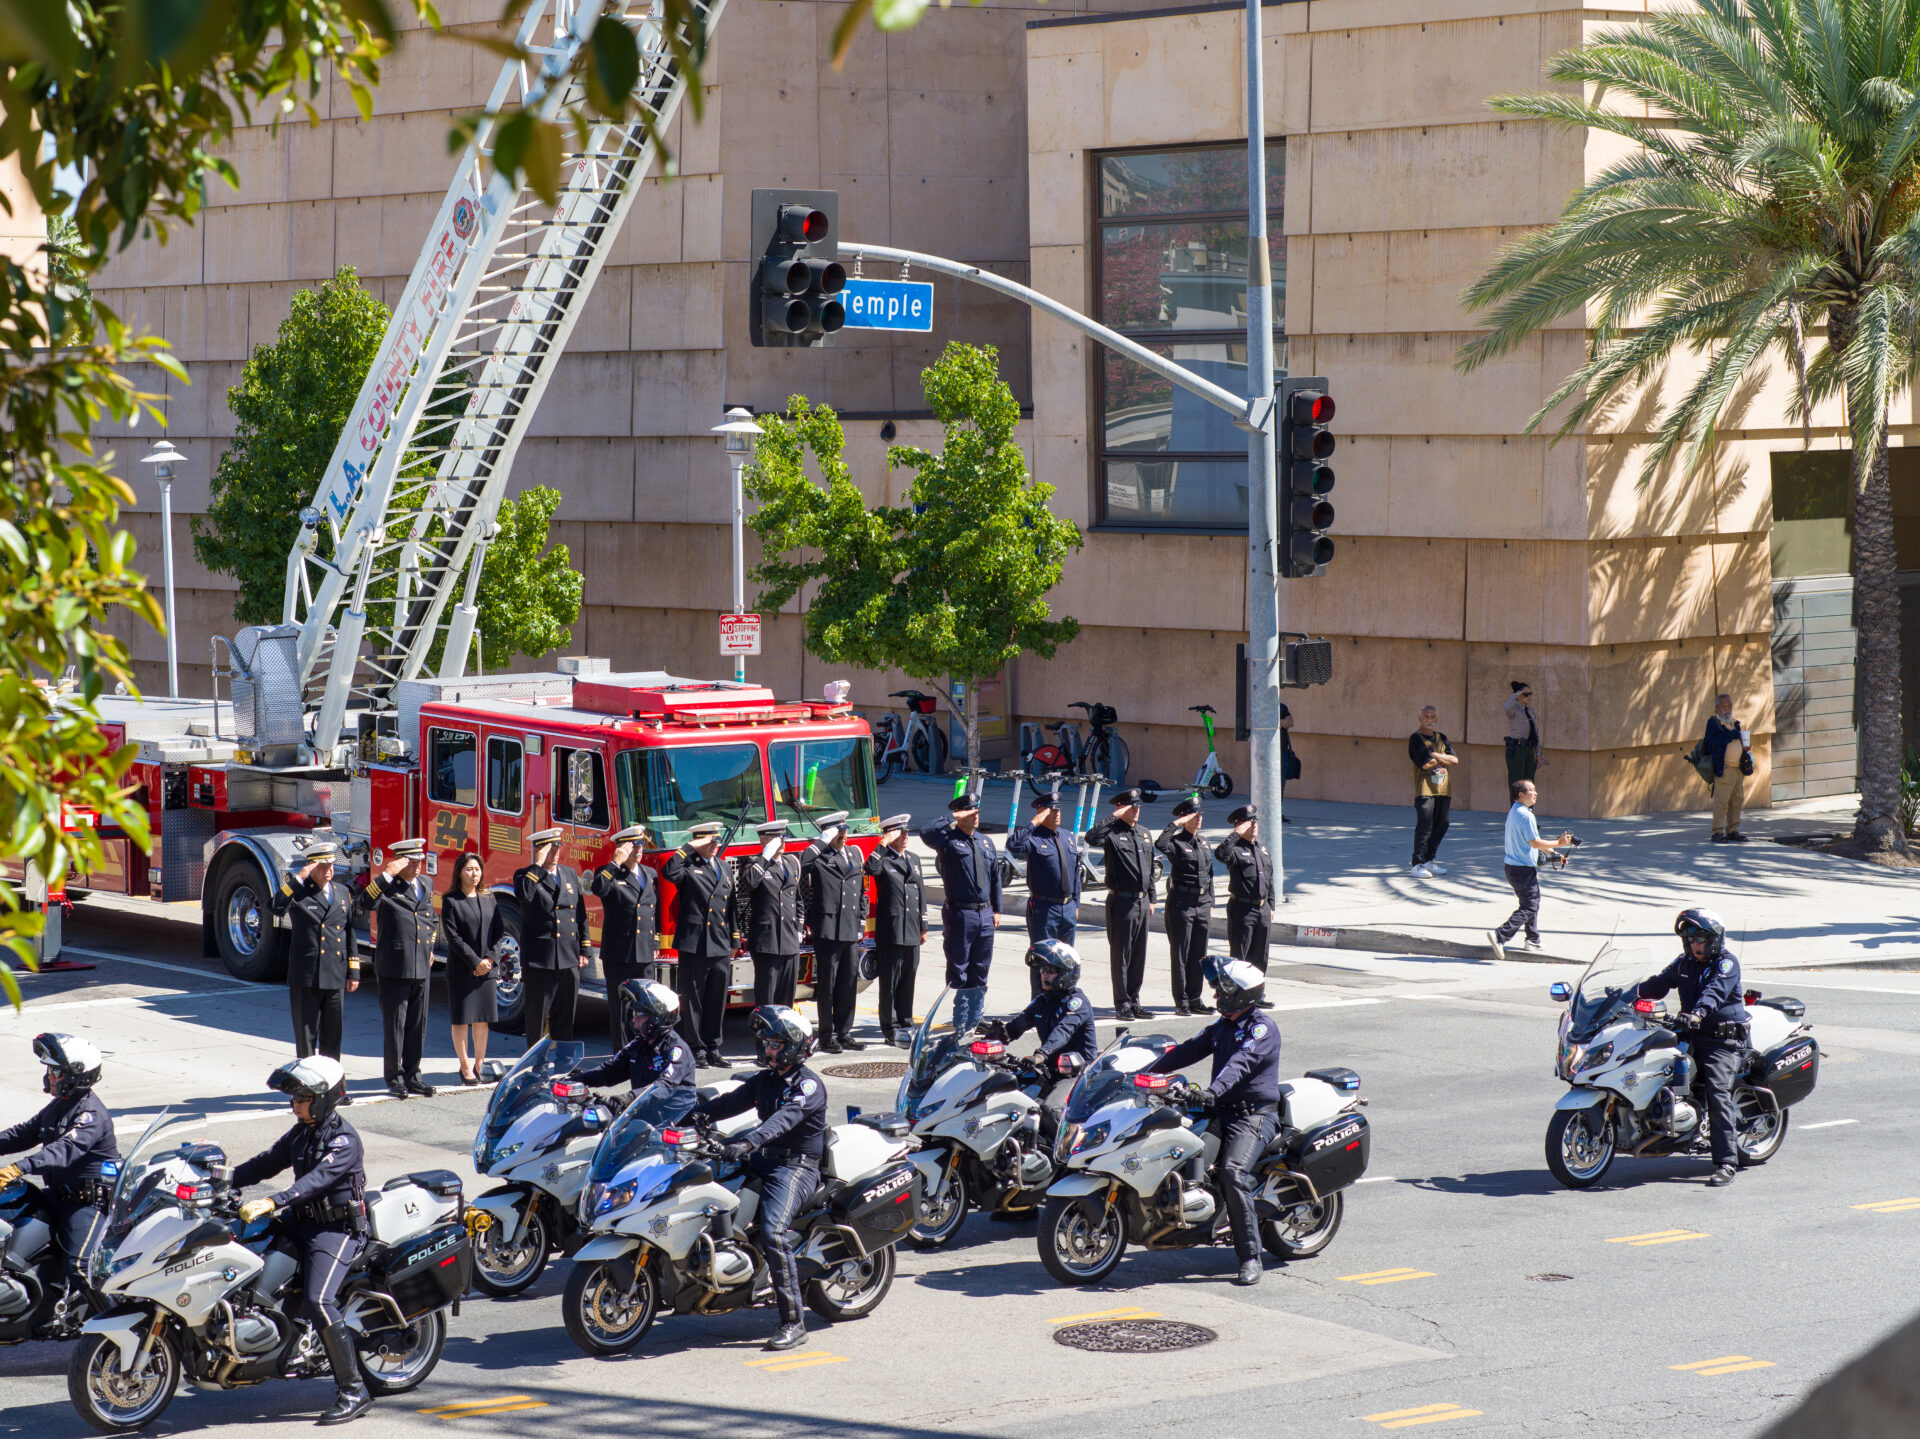 On Thursday morning, October 5, 2023, a funeral mass was held to honor the life and legacy of County of Los Angeles Sheriff’s Deputy Ryan Clinkunbroomer at the Cathedral of Our Lady of the Angels in Los Angeles.